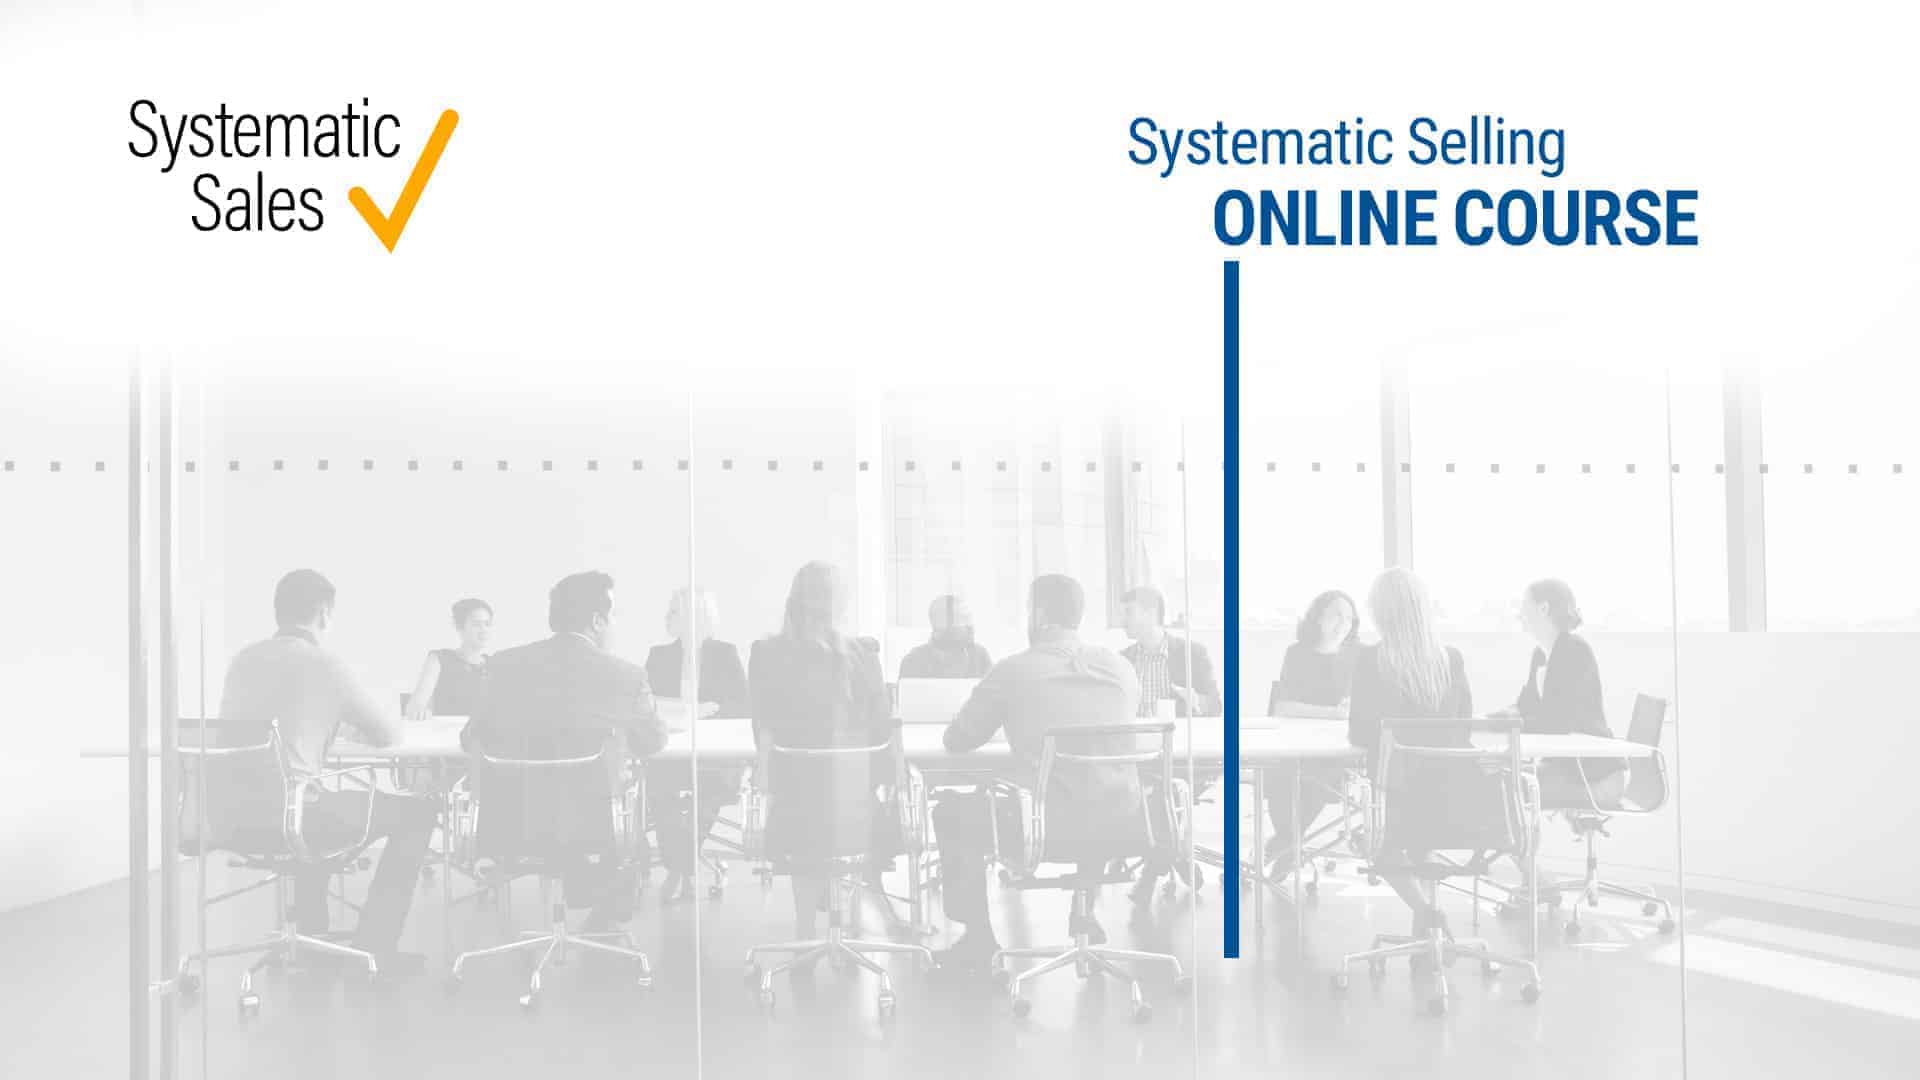 Systematic Selling Online Course & Game MO Asia Sales Region